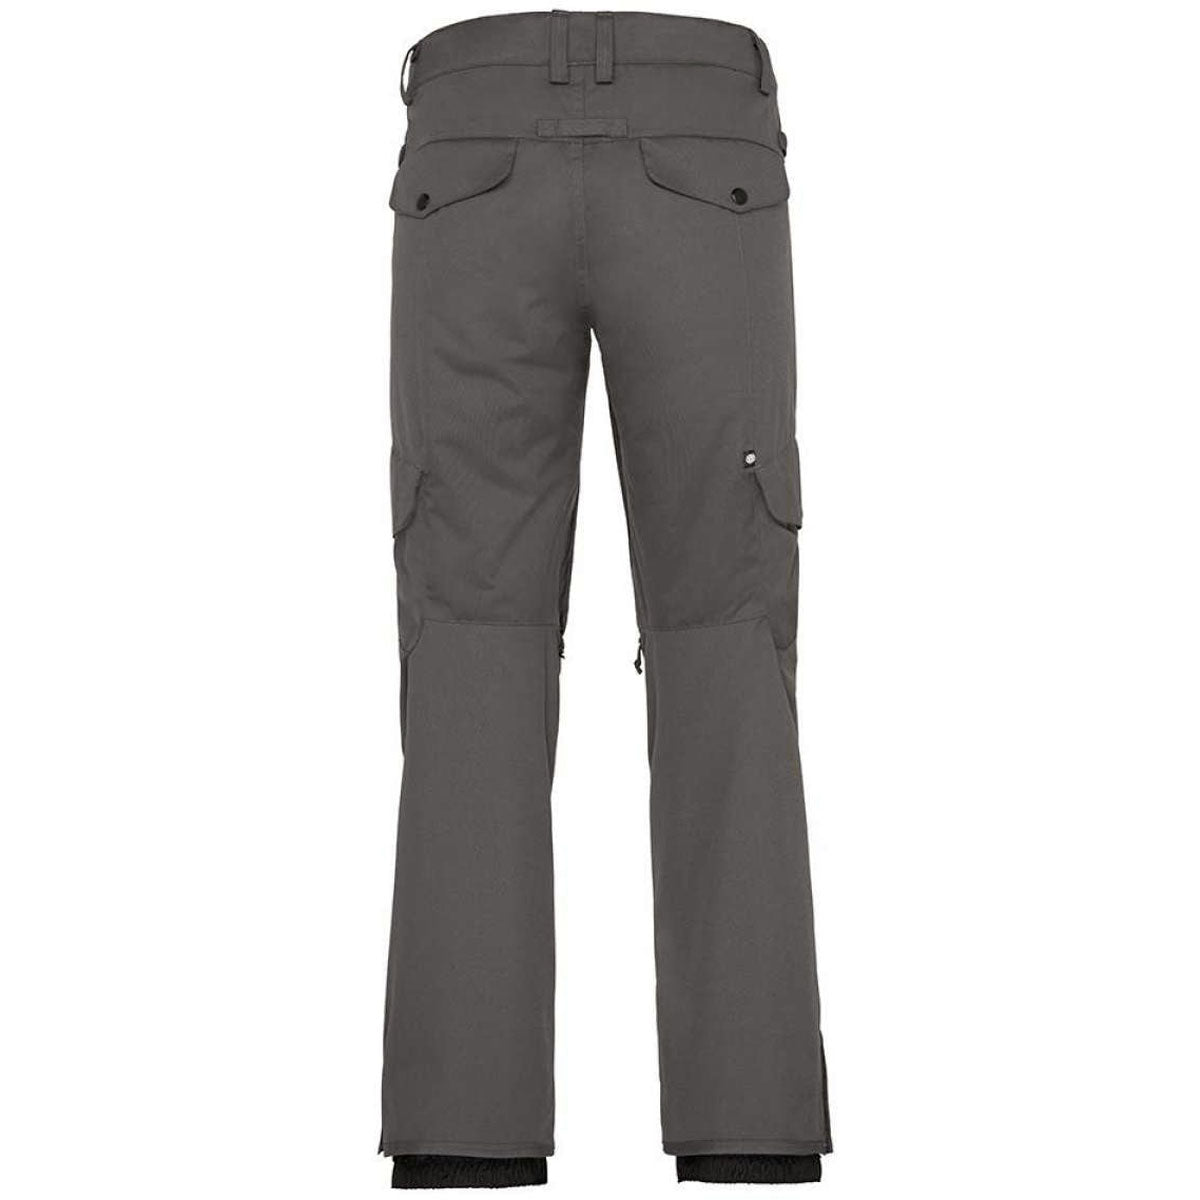 686 Womens Aura Insulated Cargo Snowboard Pants - Charcoal image 2